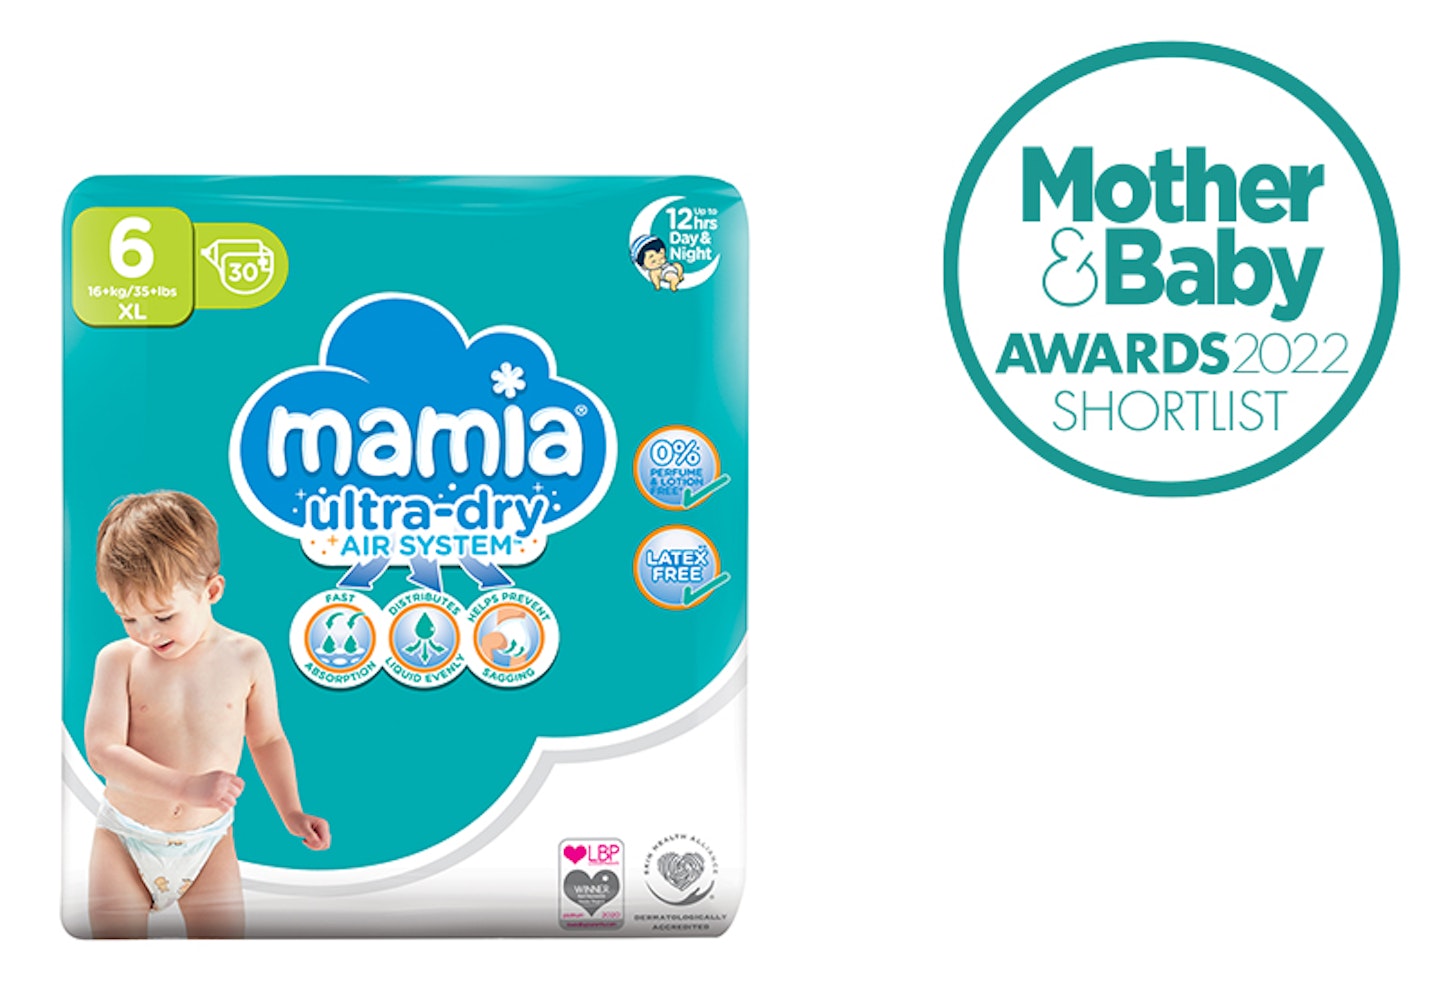 Mamia, Aldi Ultra Dry Air System size 6 review